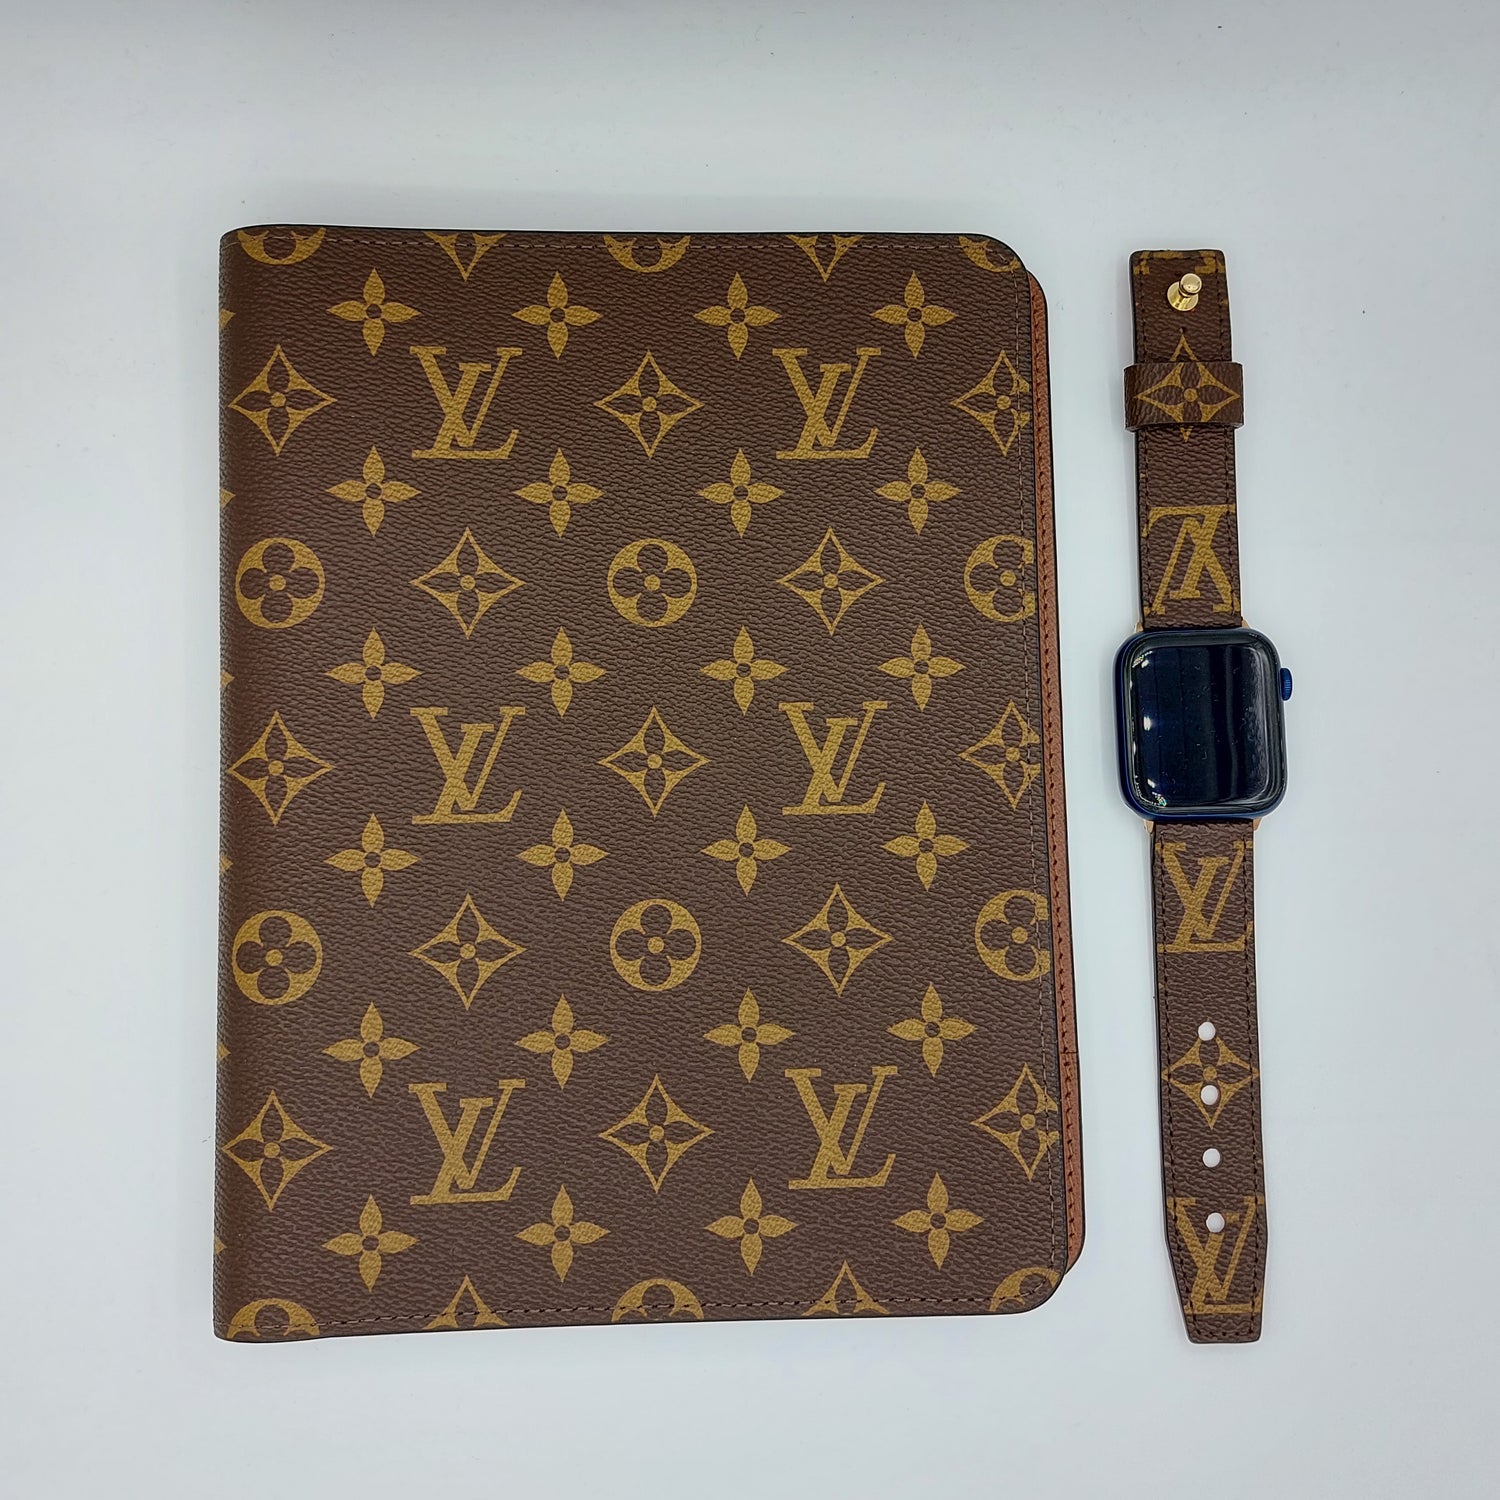 I use these in my Louis Vuitton Desk Agenda Cover! One of my